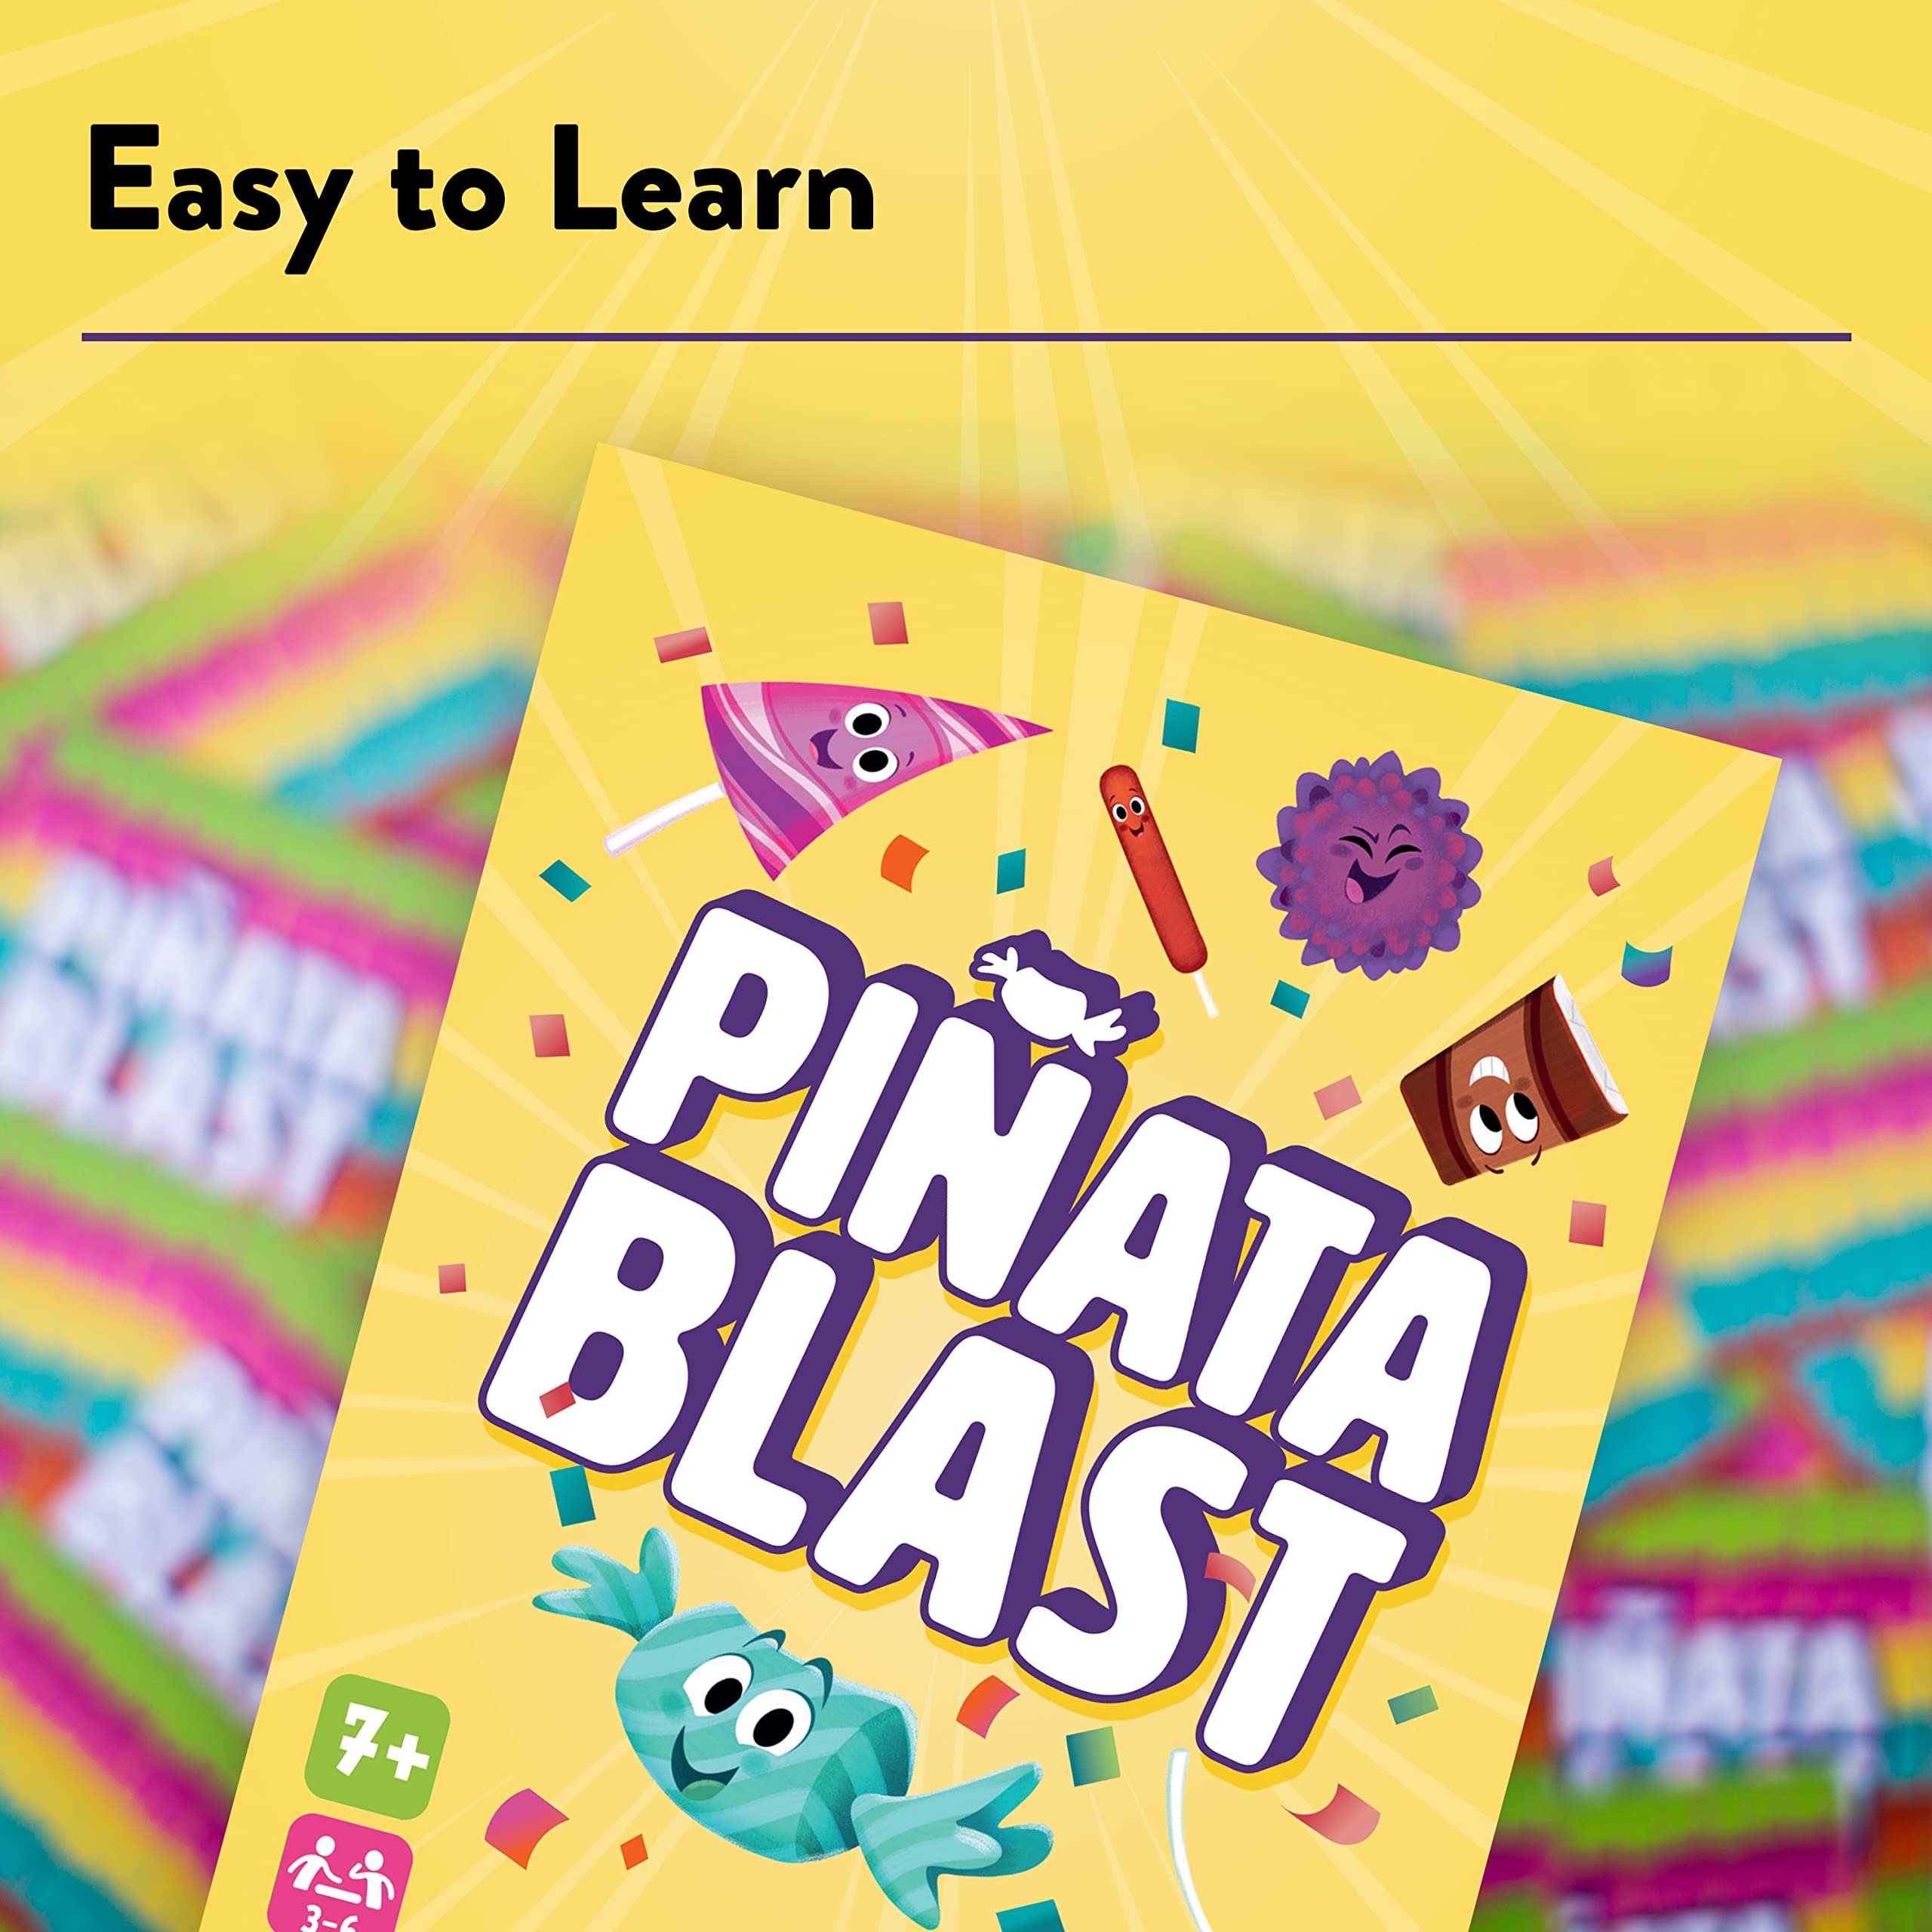 Ravensburger Piñata Blast - A Fast-Paced Party Game for Ages 7 and Up